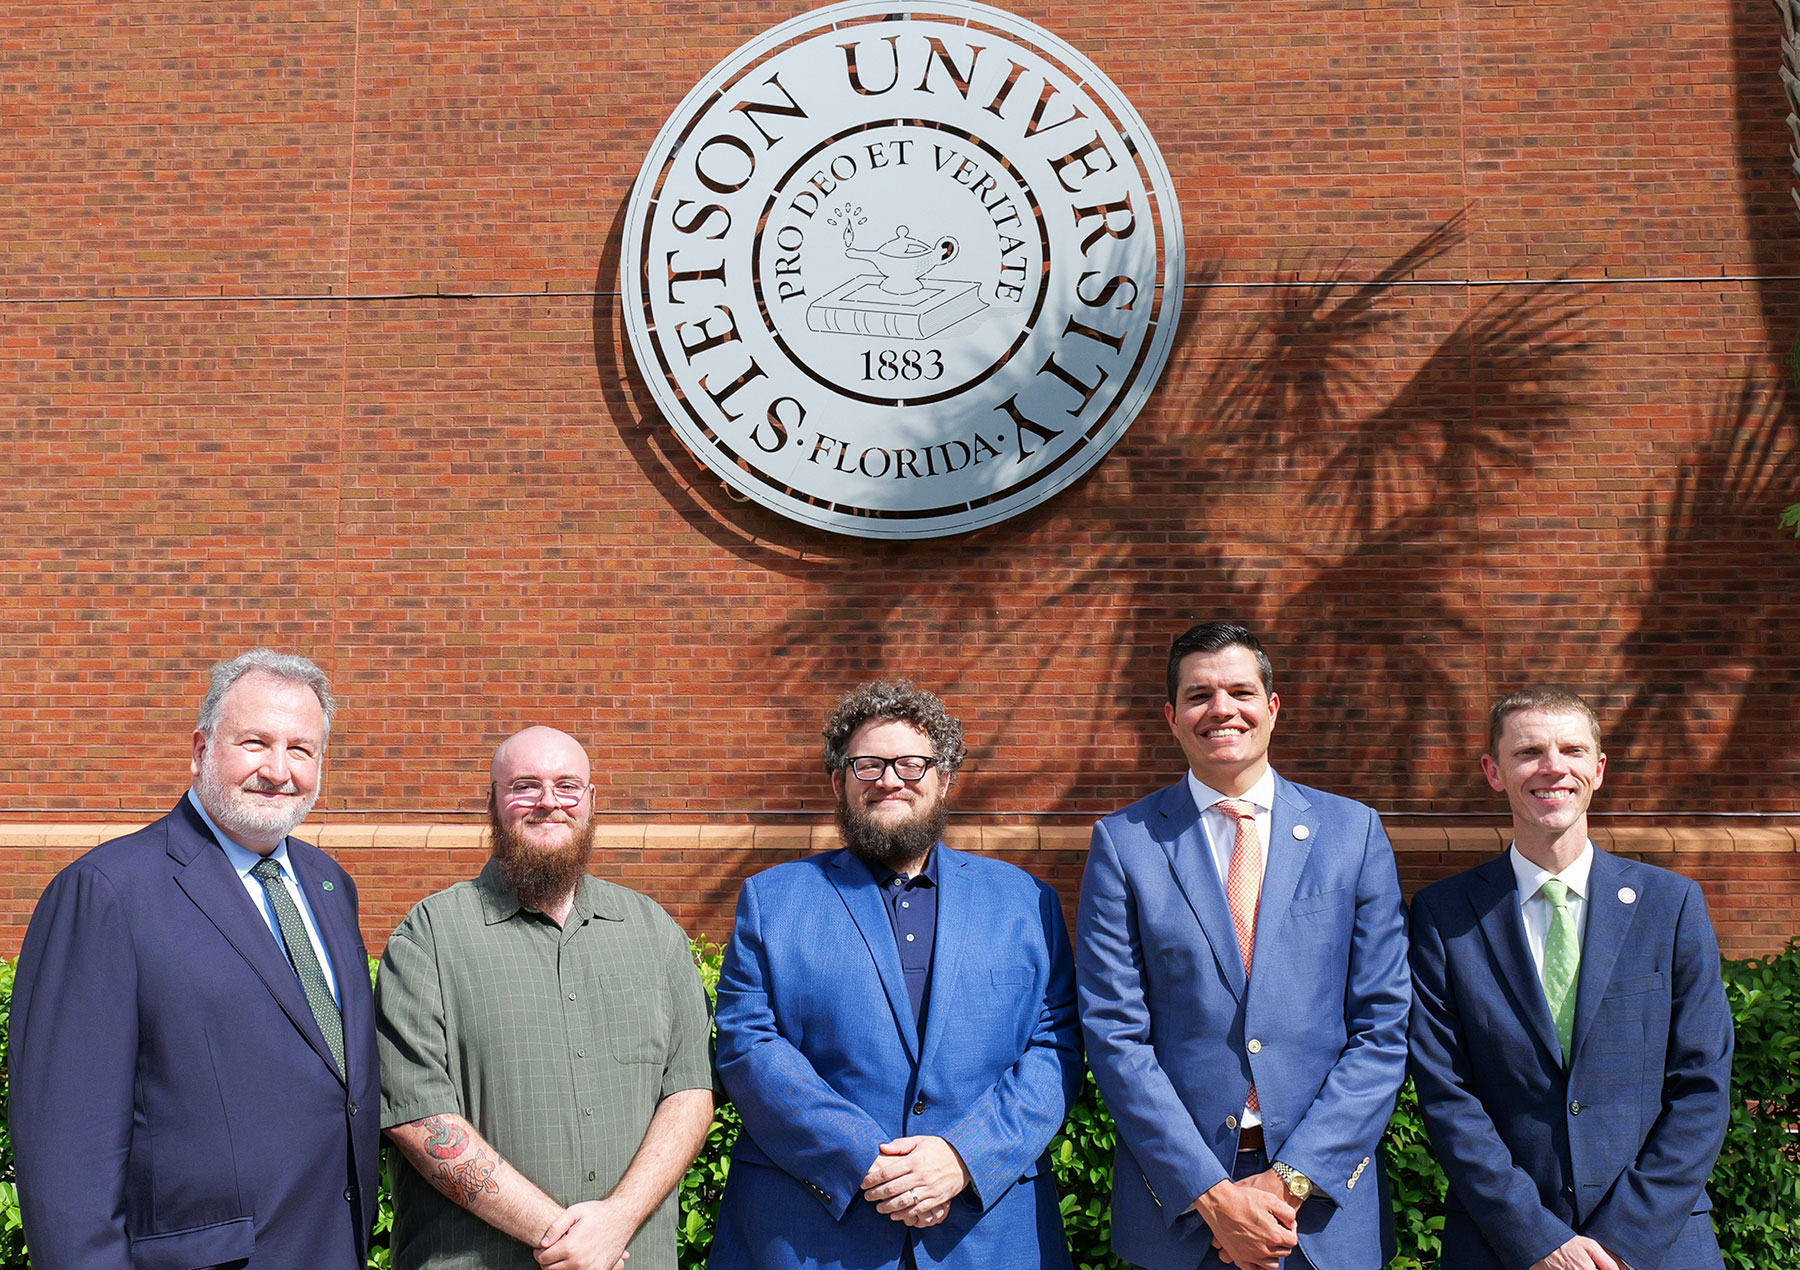 Group photo of officials from Stetson and Orlando Economic Partnership in front of Stetson seal